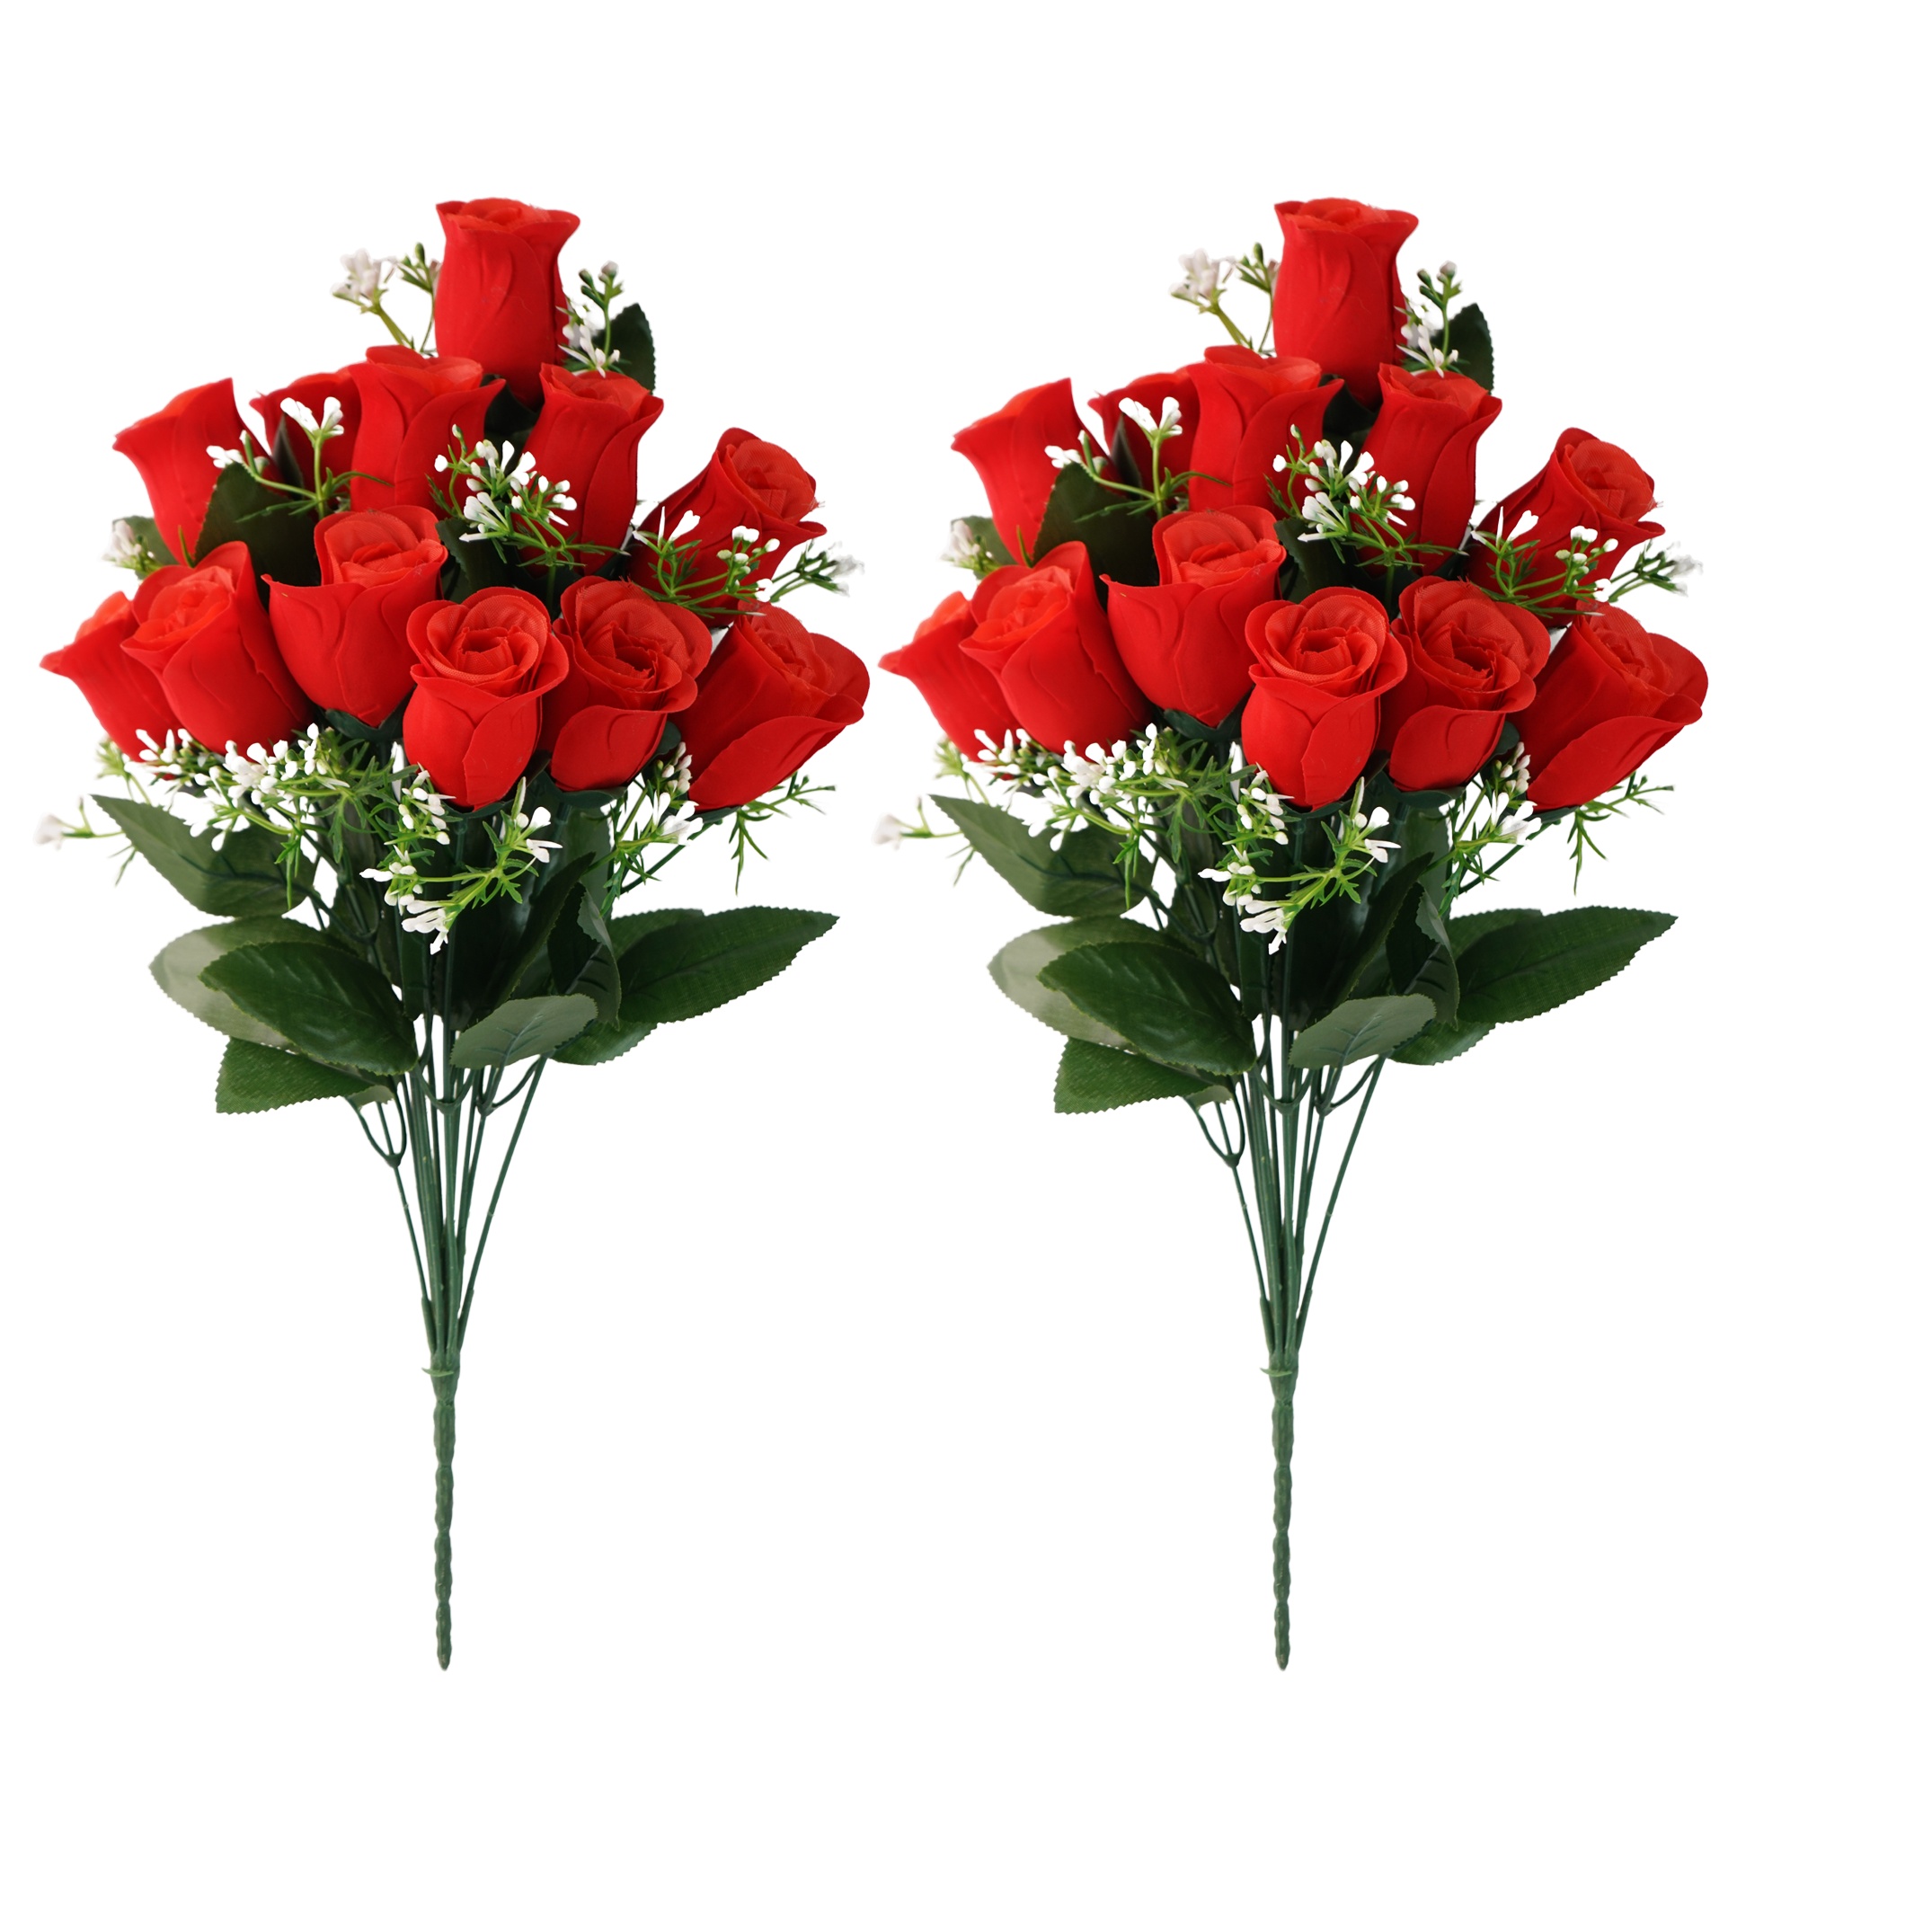 

2 Sets Artificial Cemetery Flowers, Outdoor Grave Decorations Roses, Beautiful Arrangements Bouquet With Cemetery Vase, Lasting And Non-bleed Colors